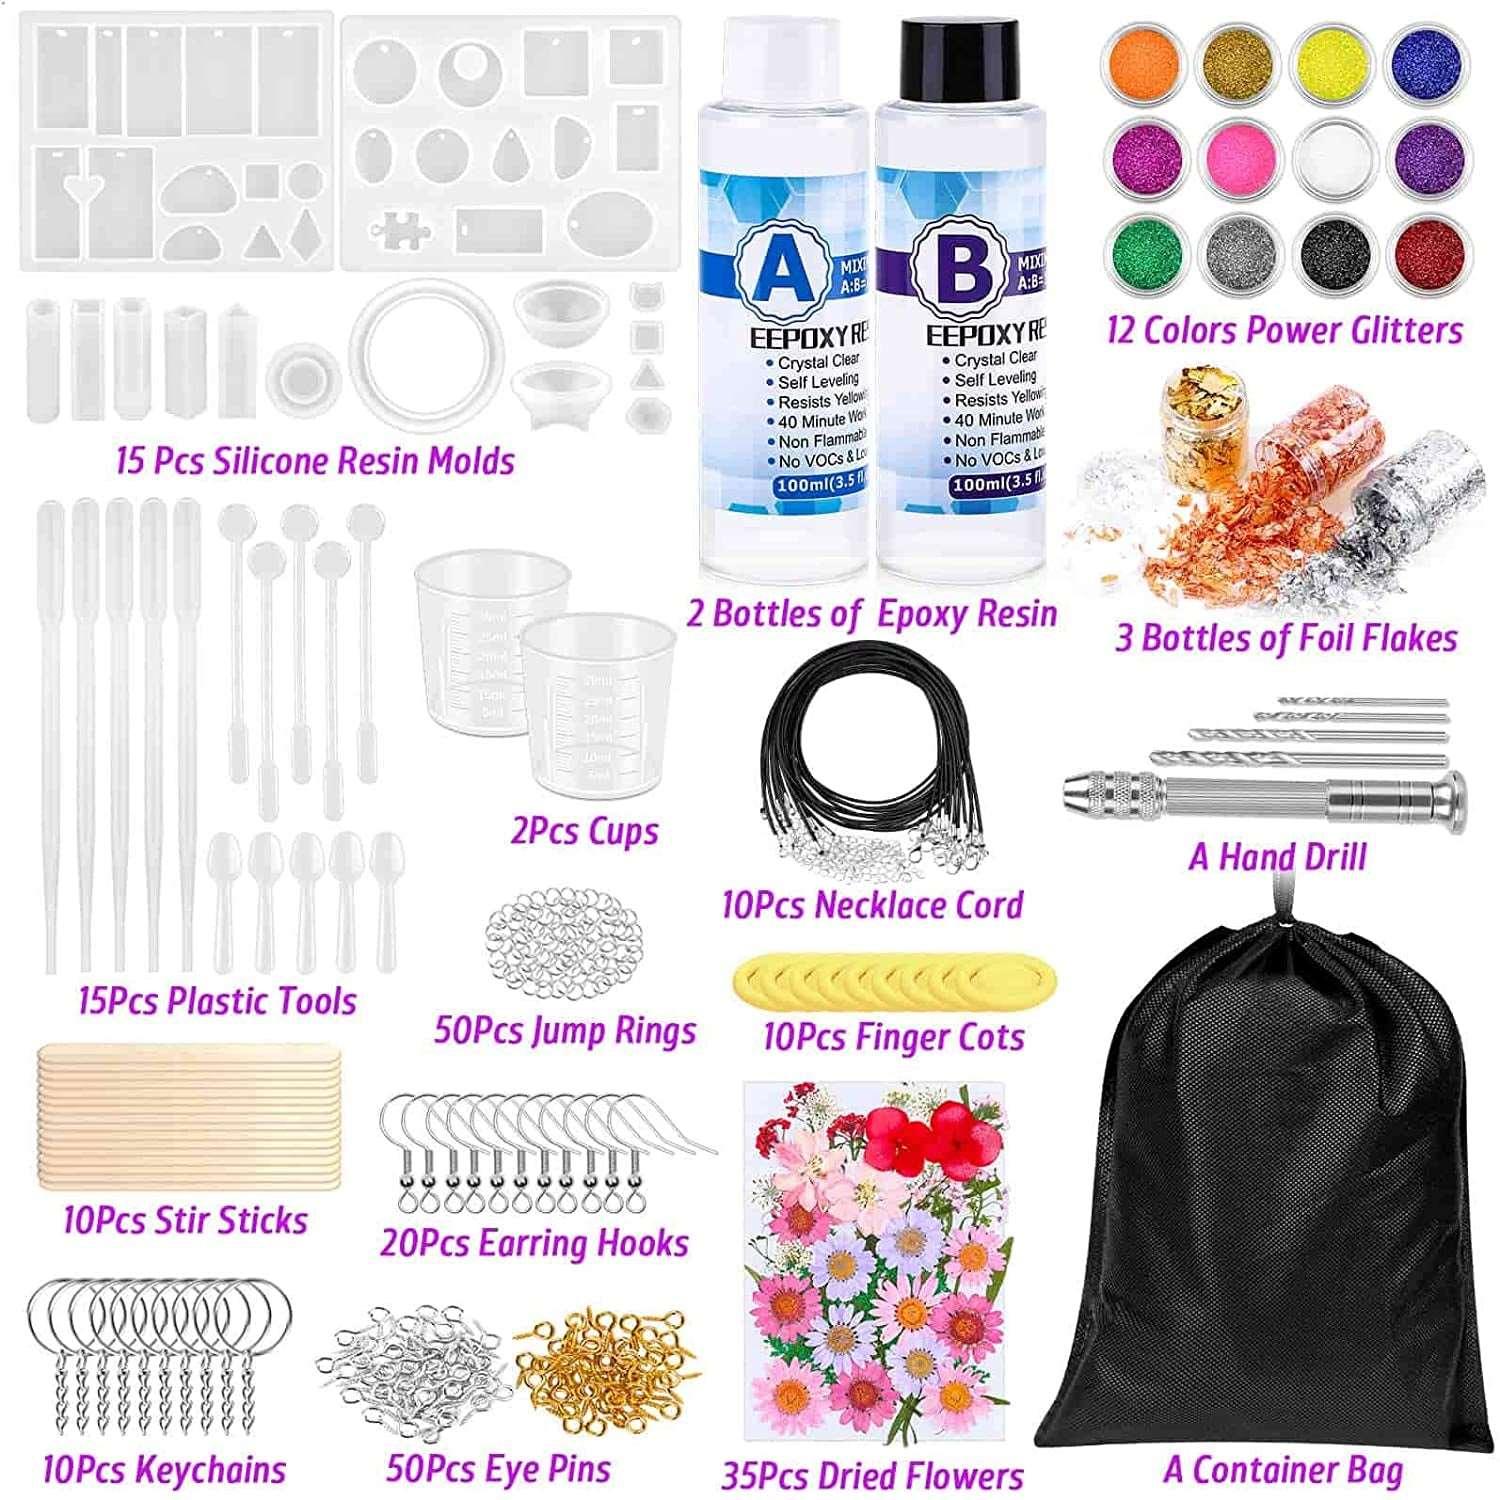 IGaiety Resin Jewelry Making Kit 240 Pcs Silicone Epoxy Resin Mold Keychain  Starter Kit Bundle with Resin Molds and Pigments Tools for Resin Beginners